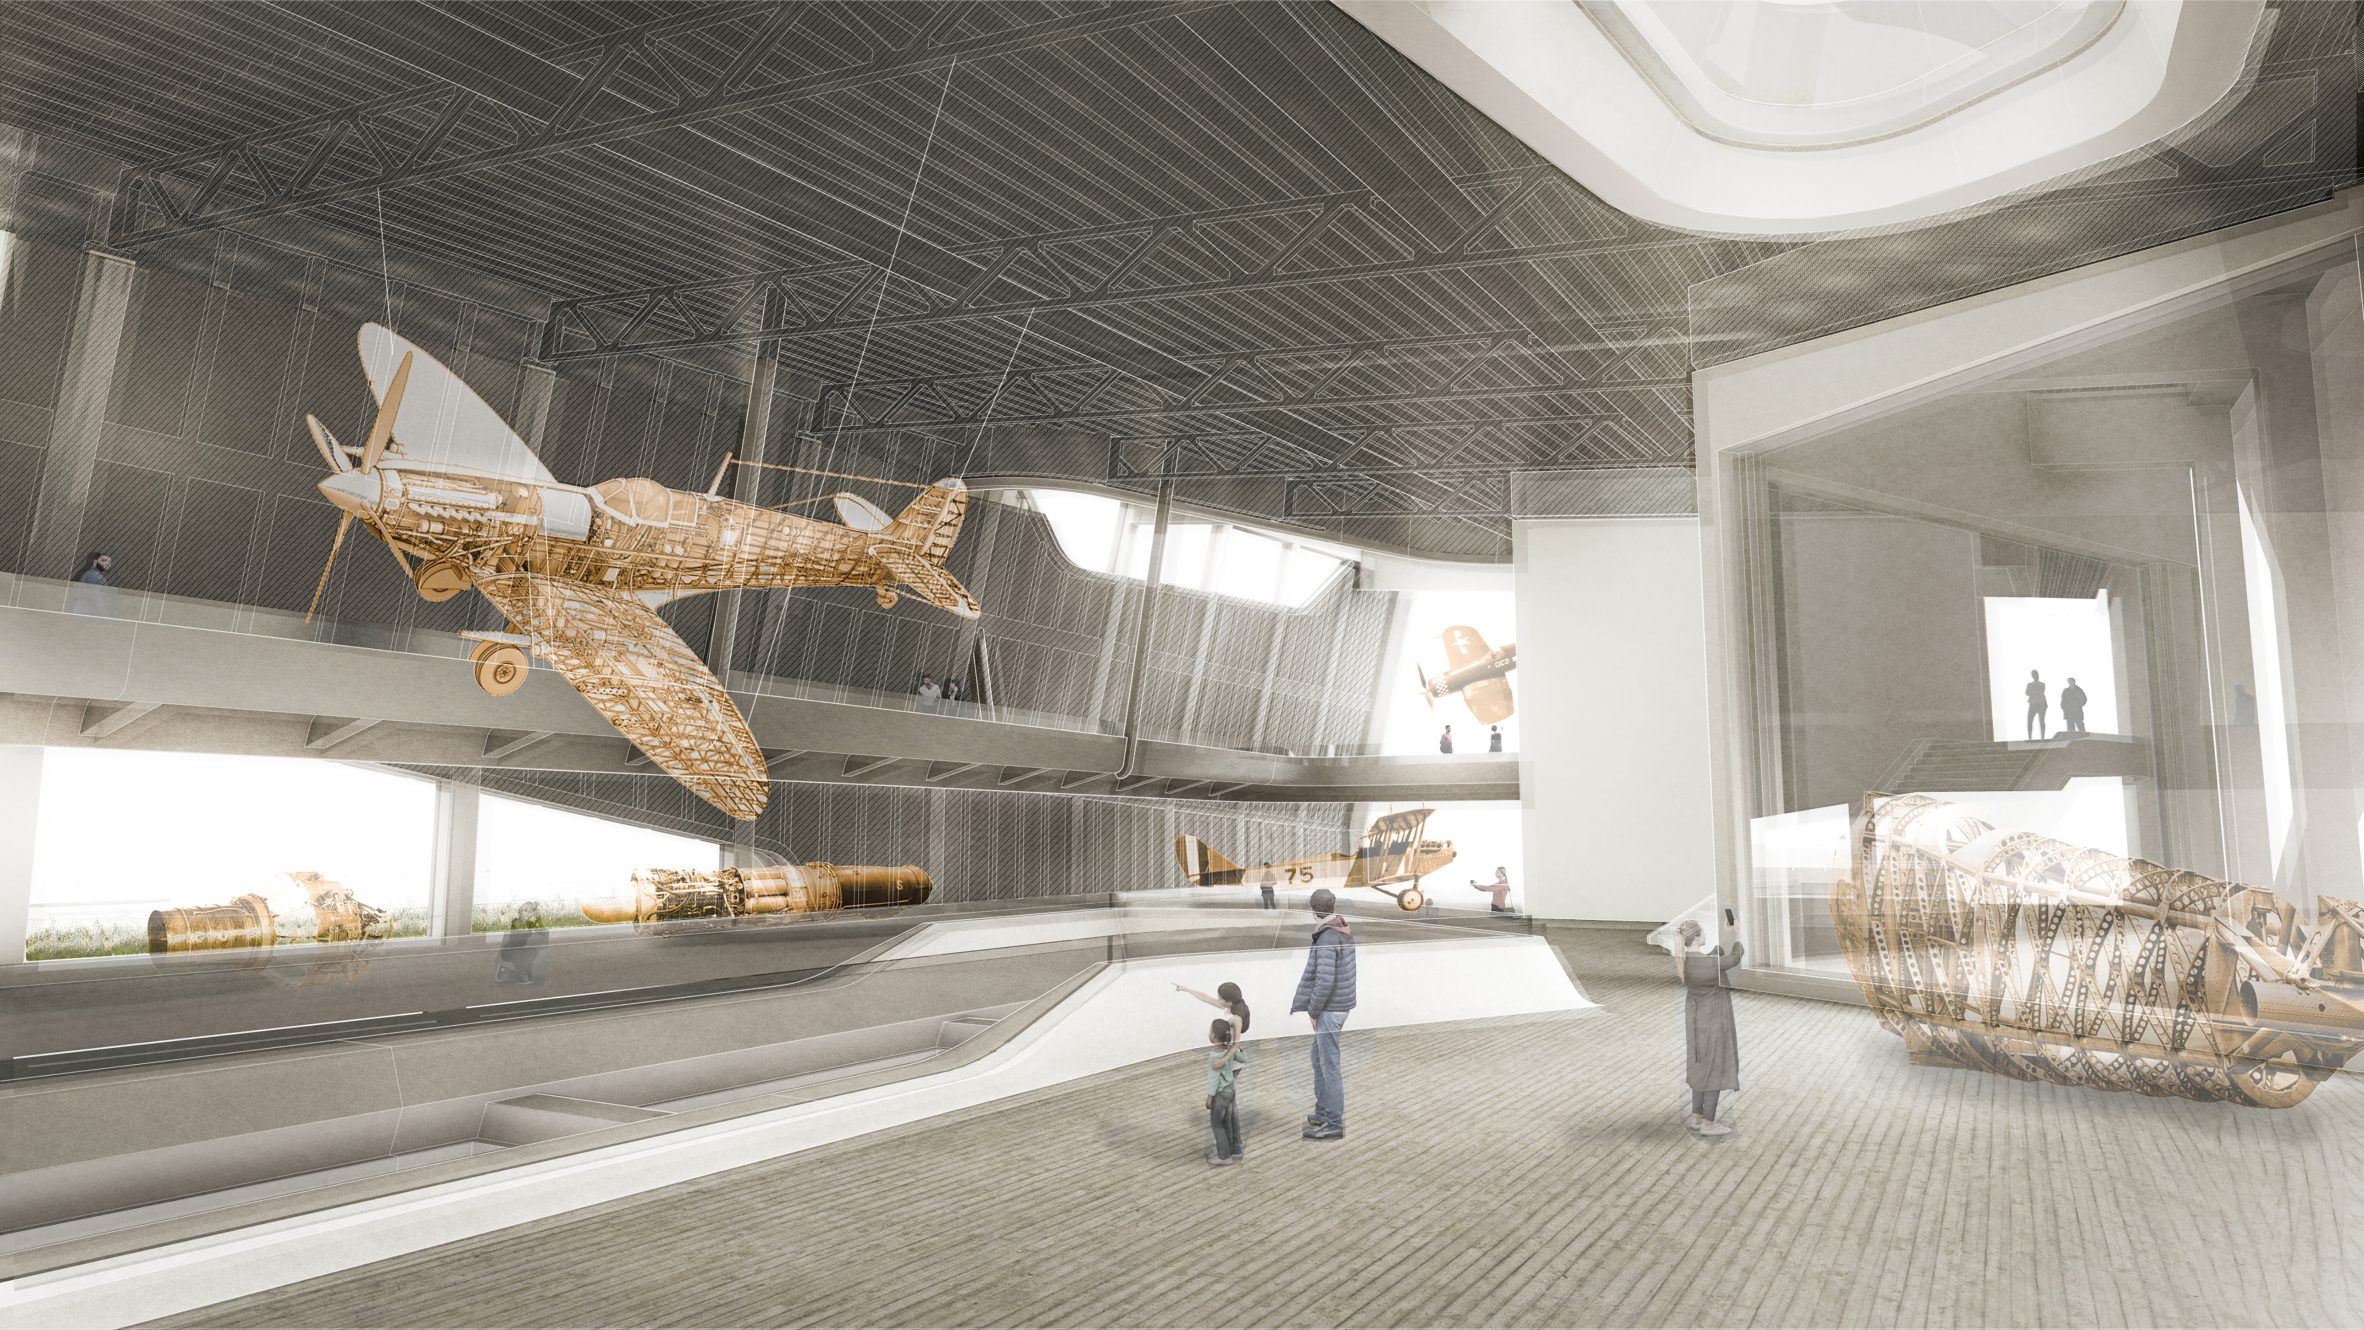 Visualisation showing interior of museum with aircraft hanging from ceiling